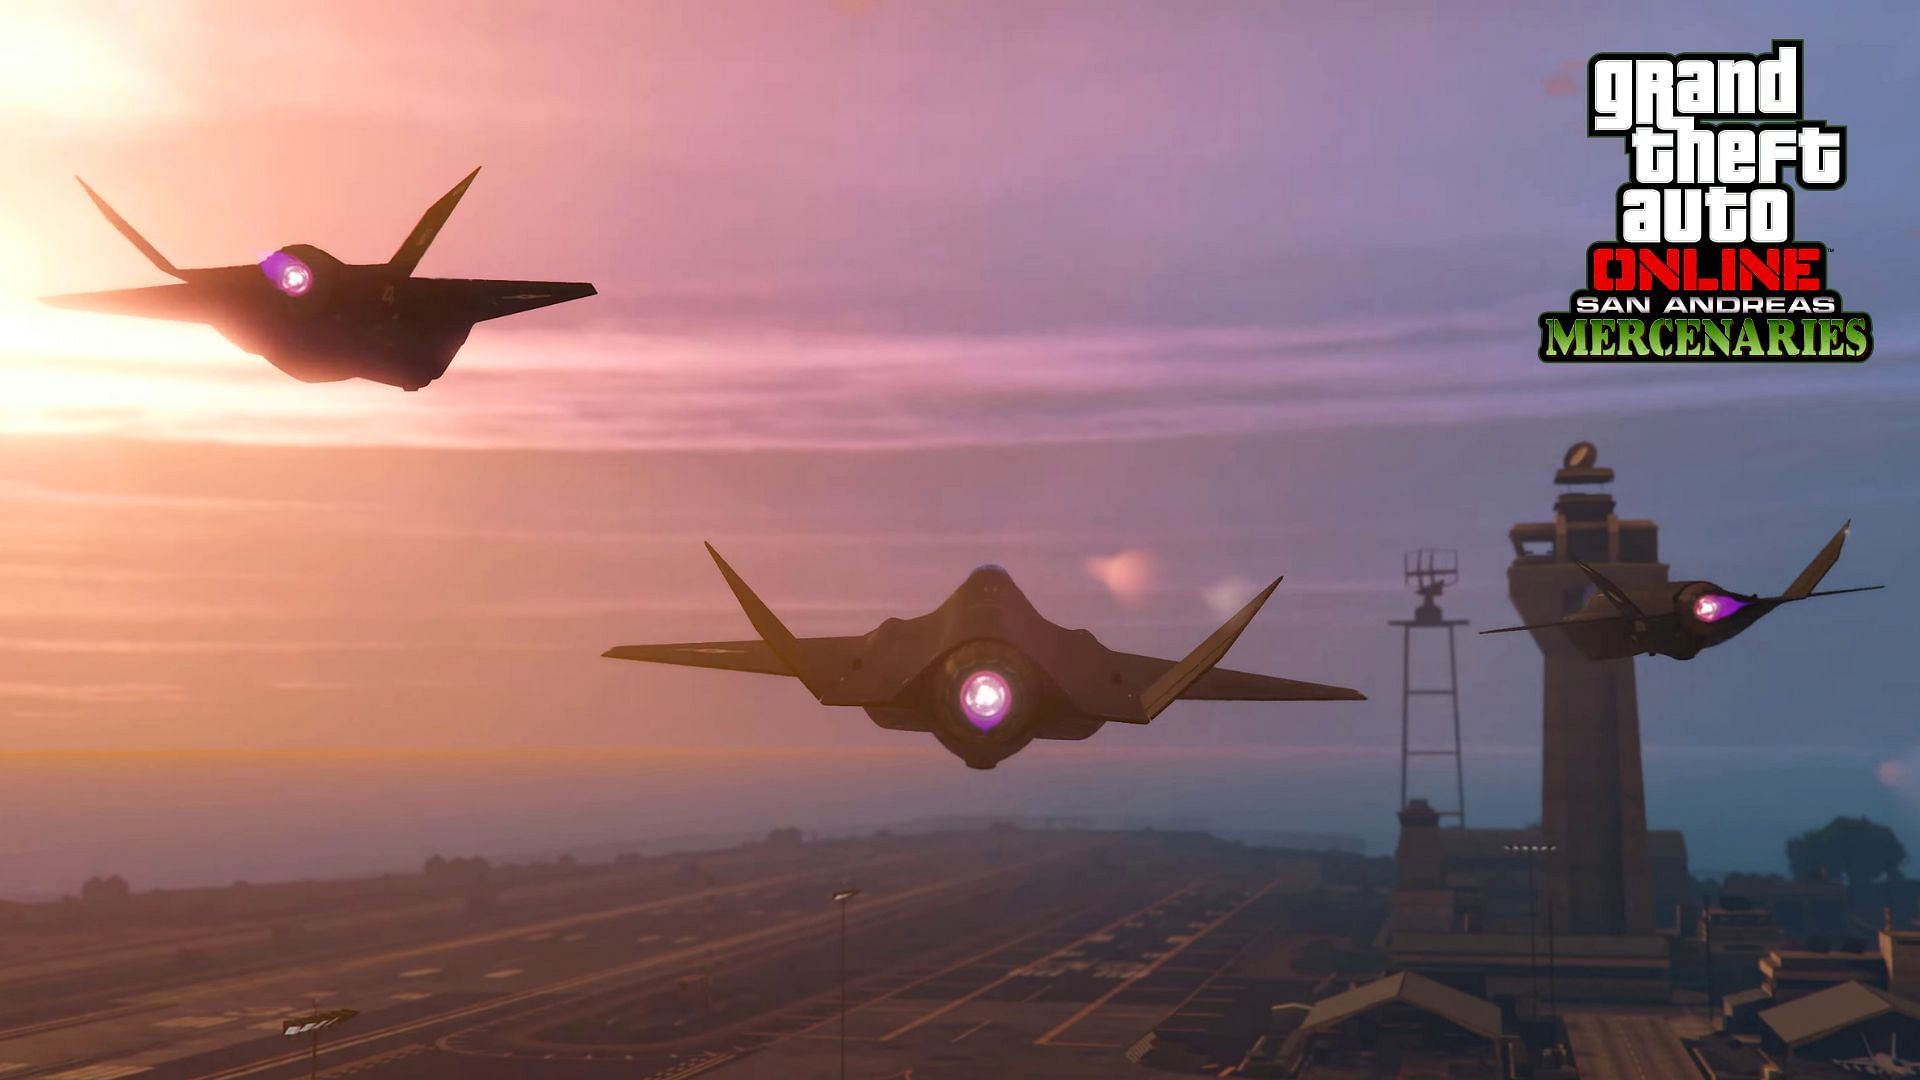 The F-160 Raiju jet is officially coming to GTA Online with the San Andreas Mercenaries update (Image via Rockstar Games)